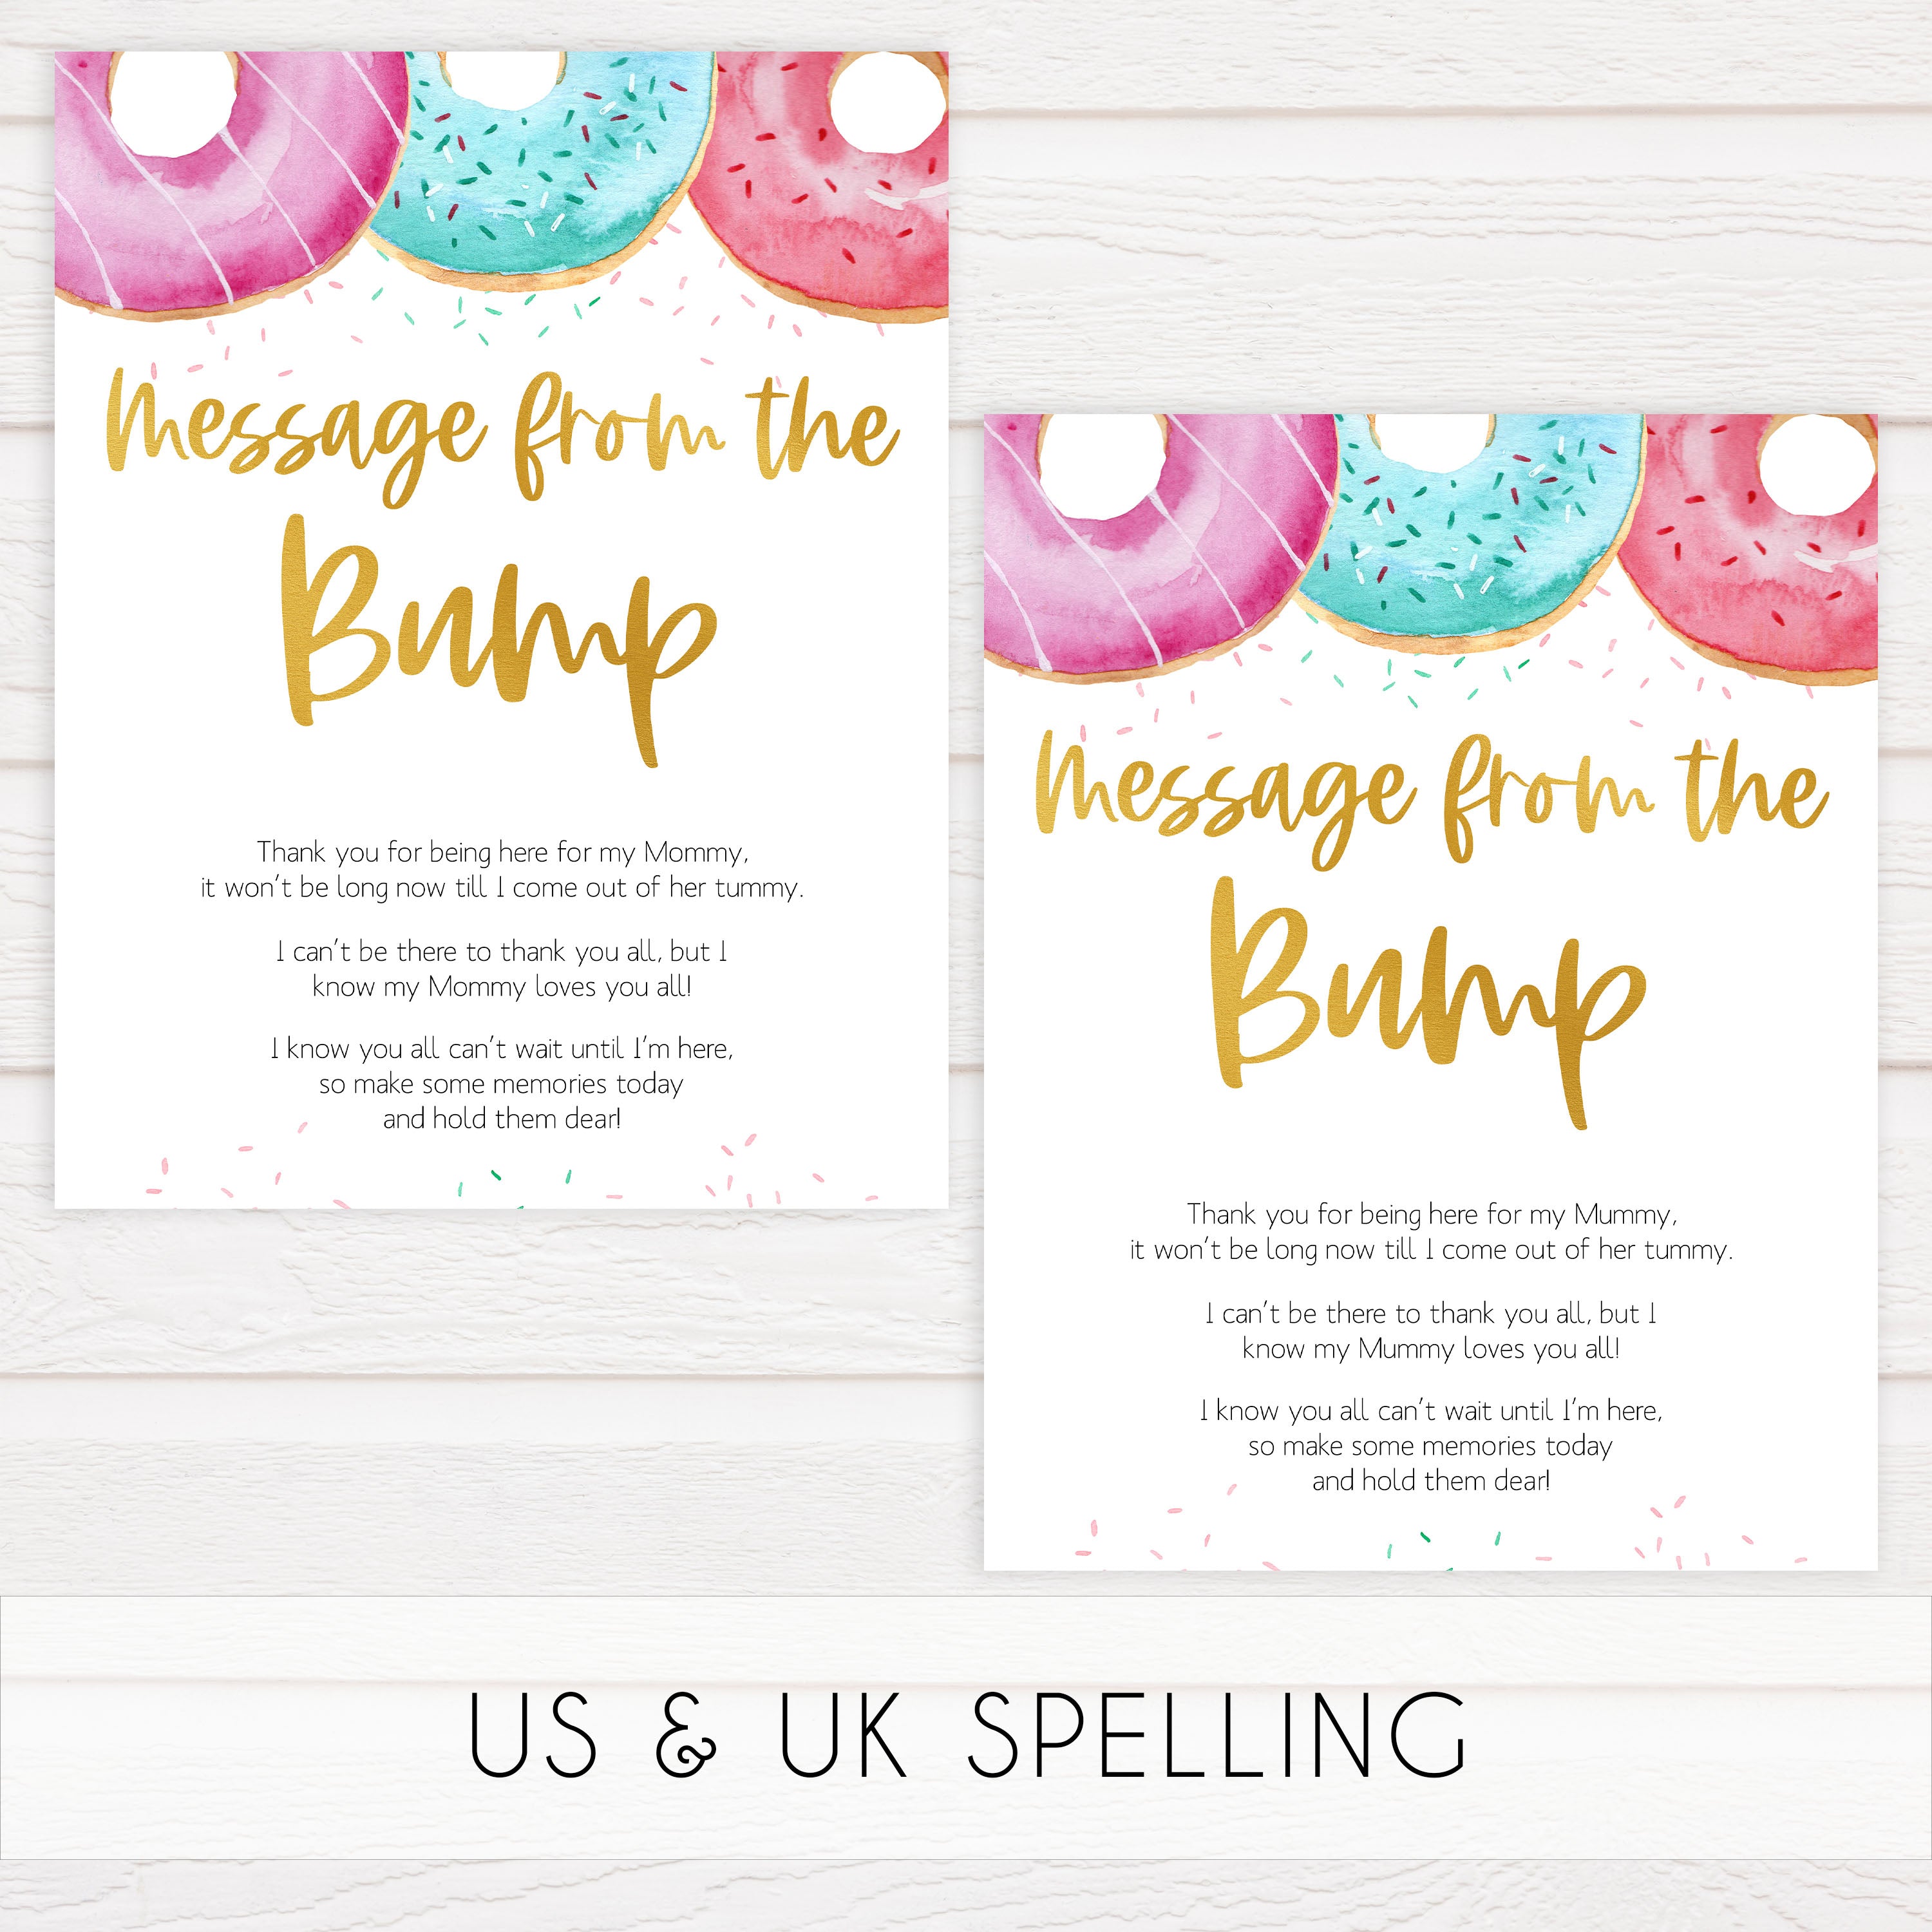 message from the bump game, Printable baby shower games, donut baby games, baby shower games, fun baby shower ideas, top baby shower ideas, donut sprinkles baby shower, baby shower games, fun donut baby shower ideas